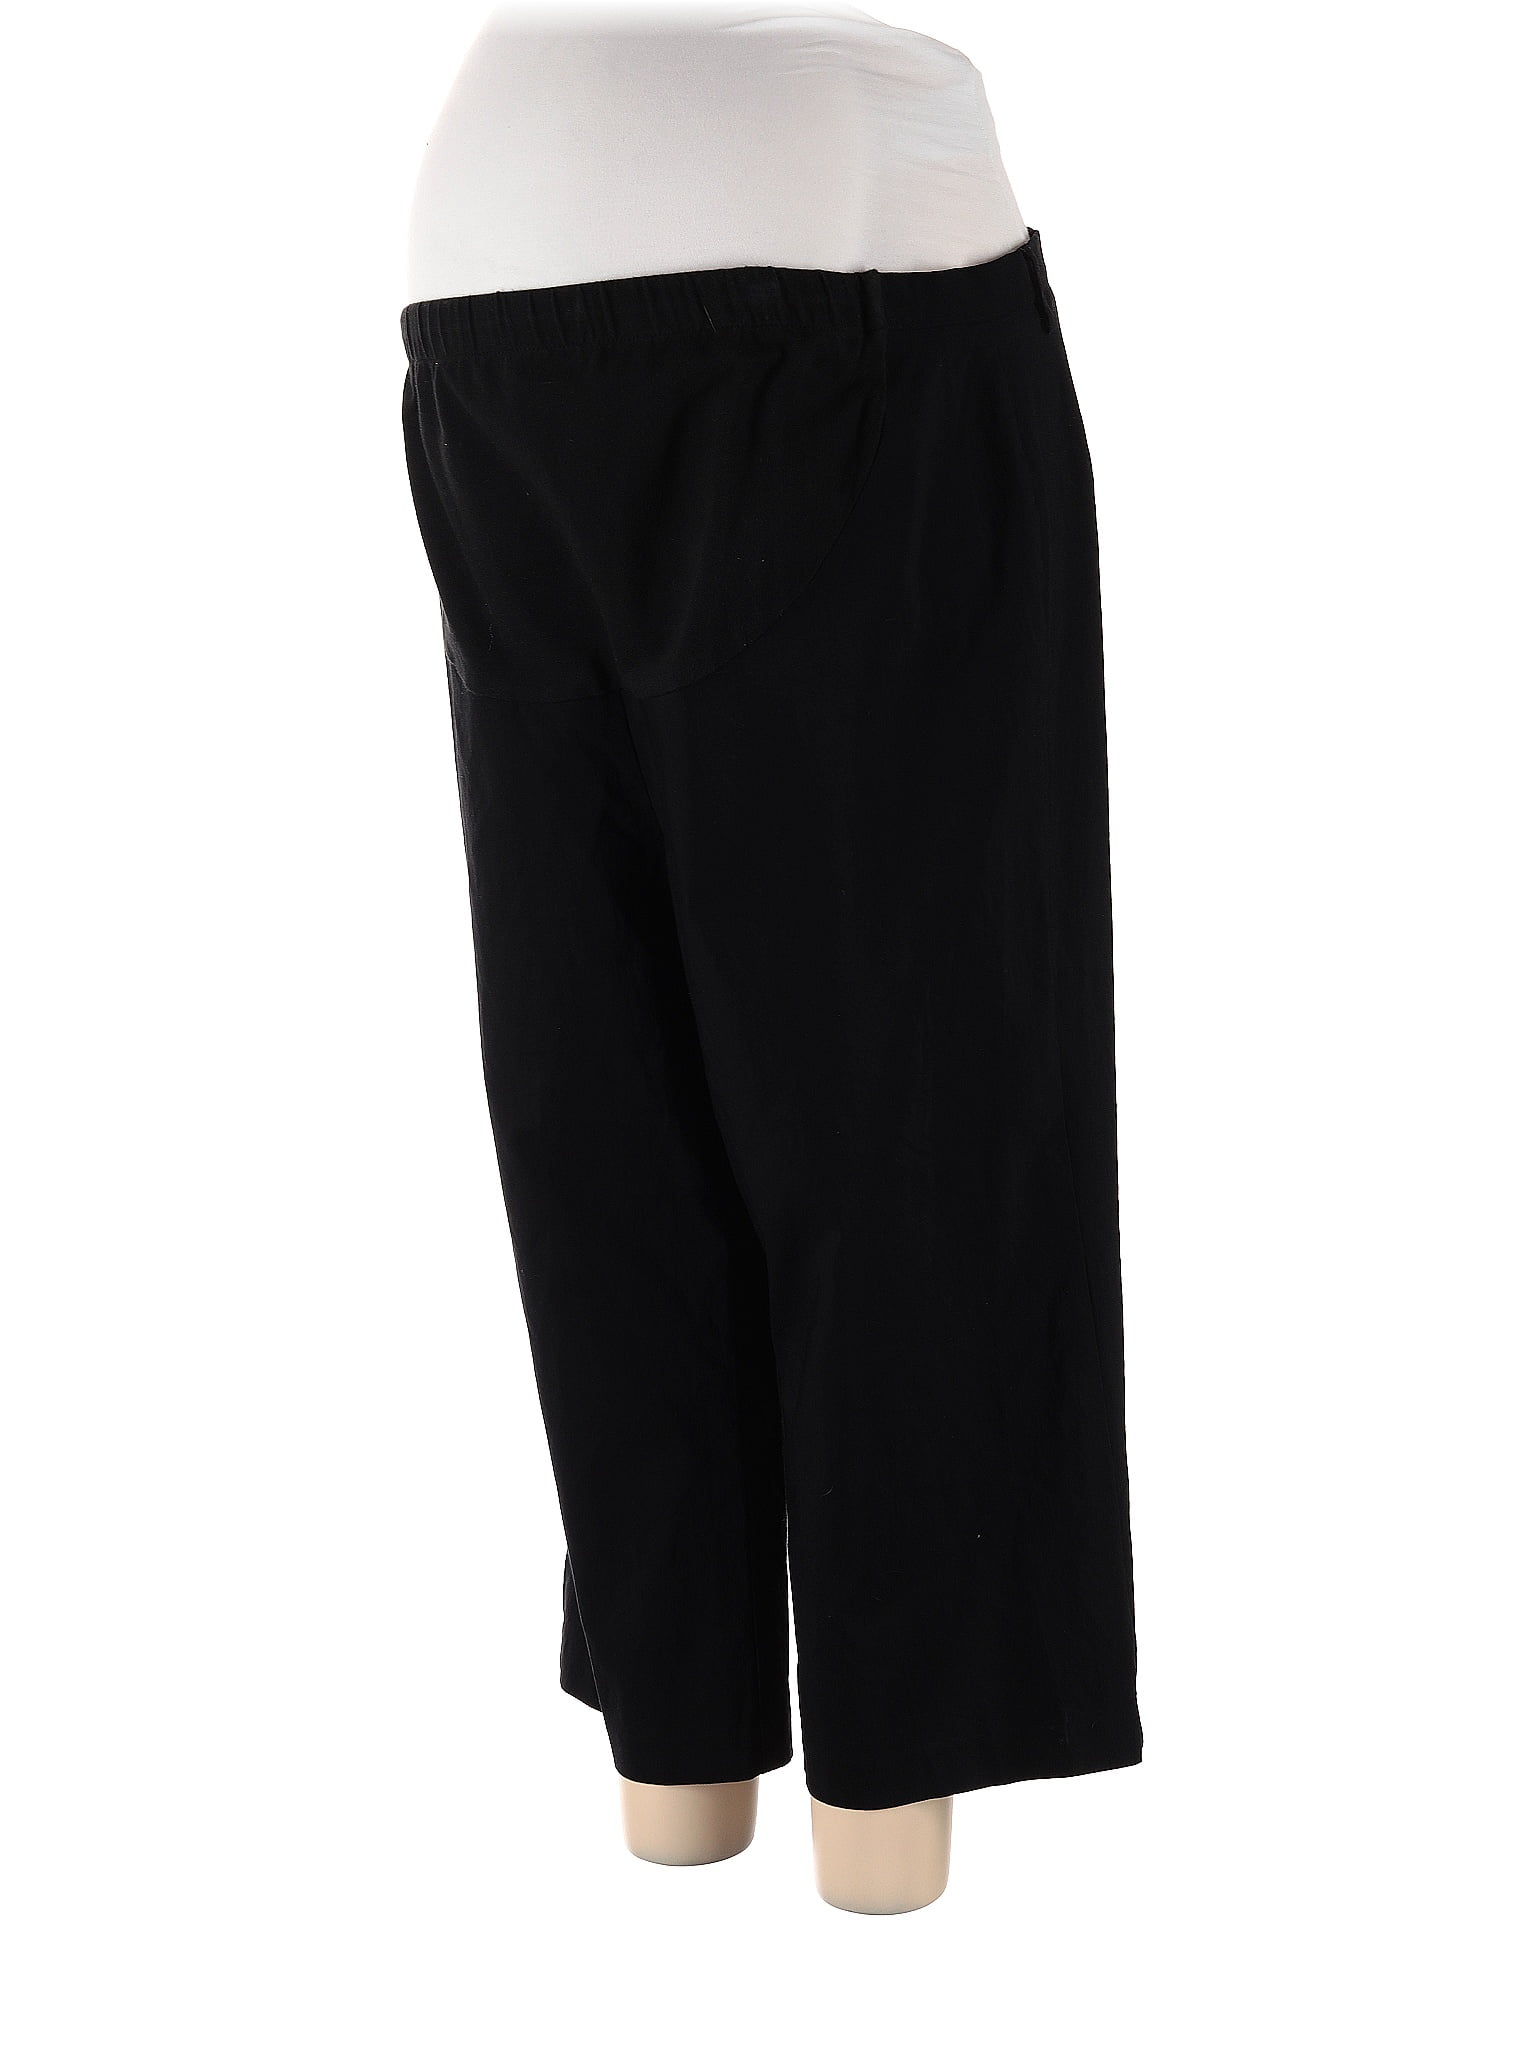 *New* Motherhood Maternity Black Maternity Pants with Raised Black Dots |  New With Tags - Size Small